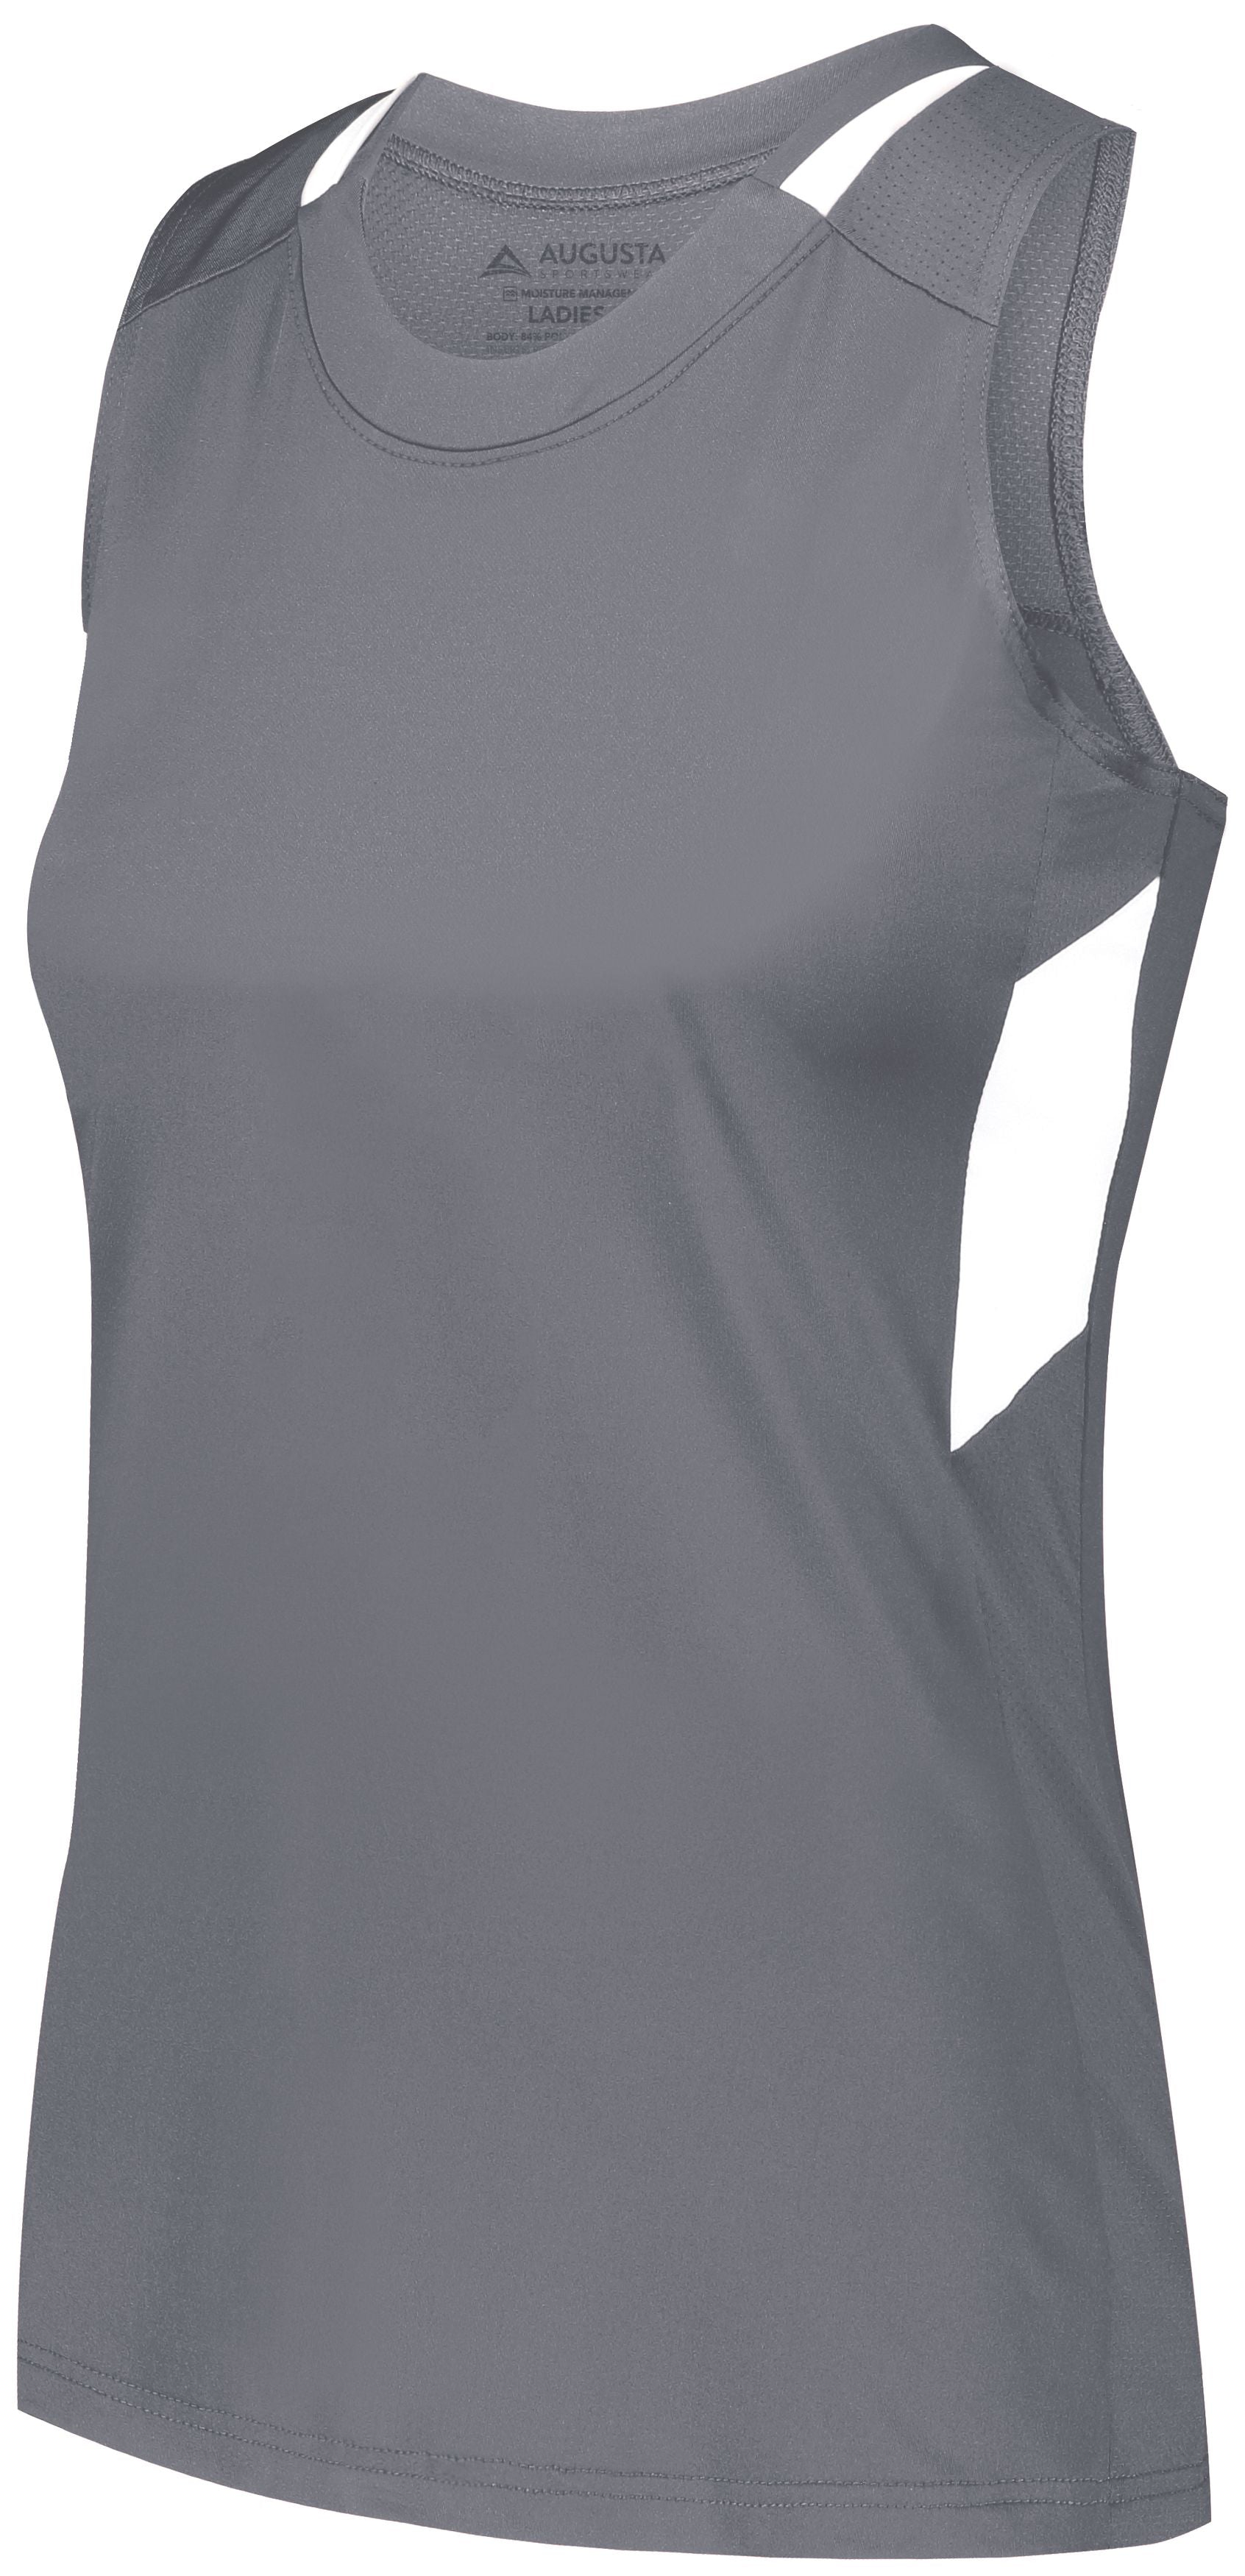 Augusta Sportswear Girls Crossover Tank in Graphite/White  -Part of the Girls, Augusta-Products, Lacrosse, Girls-Tank, Shirts, All-Sports, All-Sports-1 product lines at KanaleyCreations.com